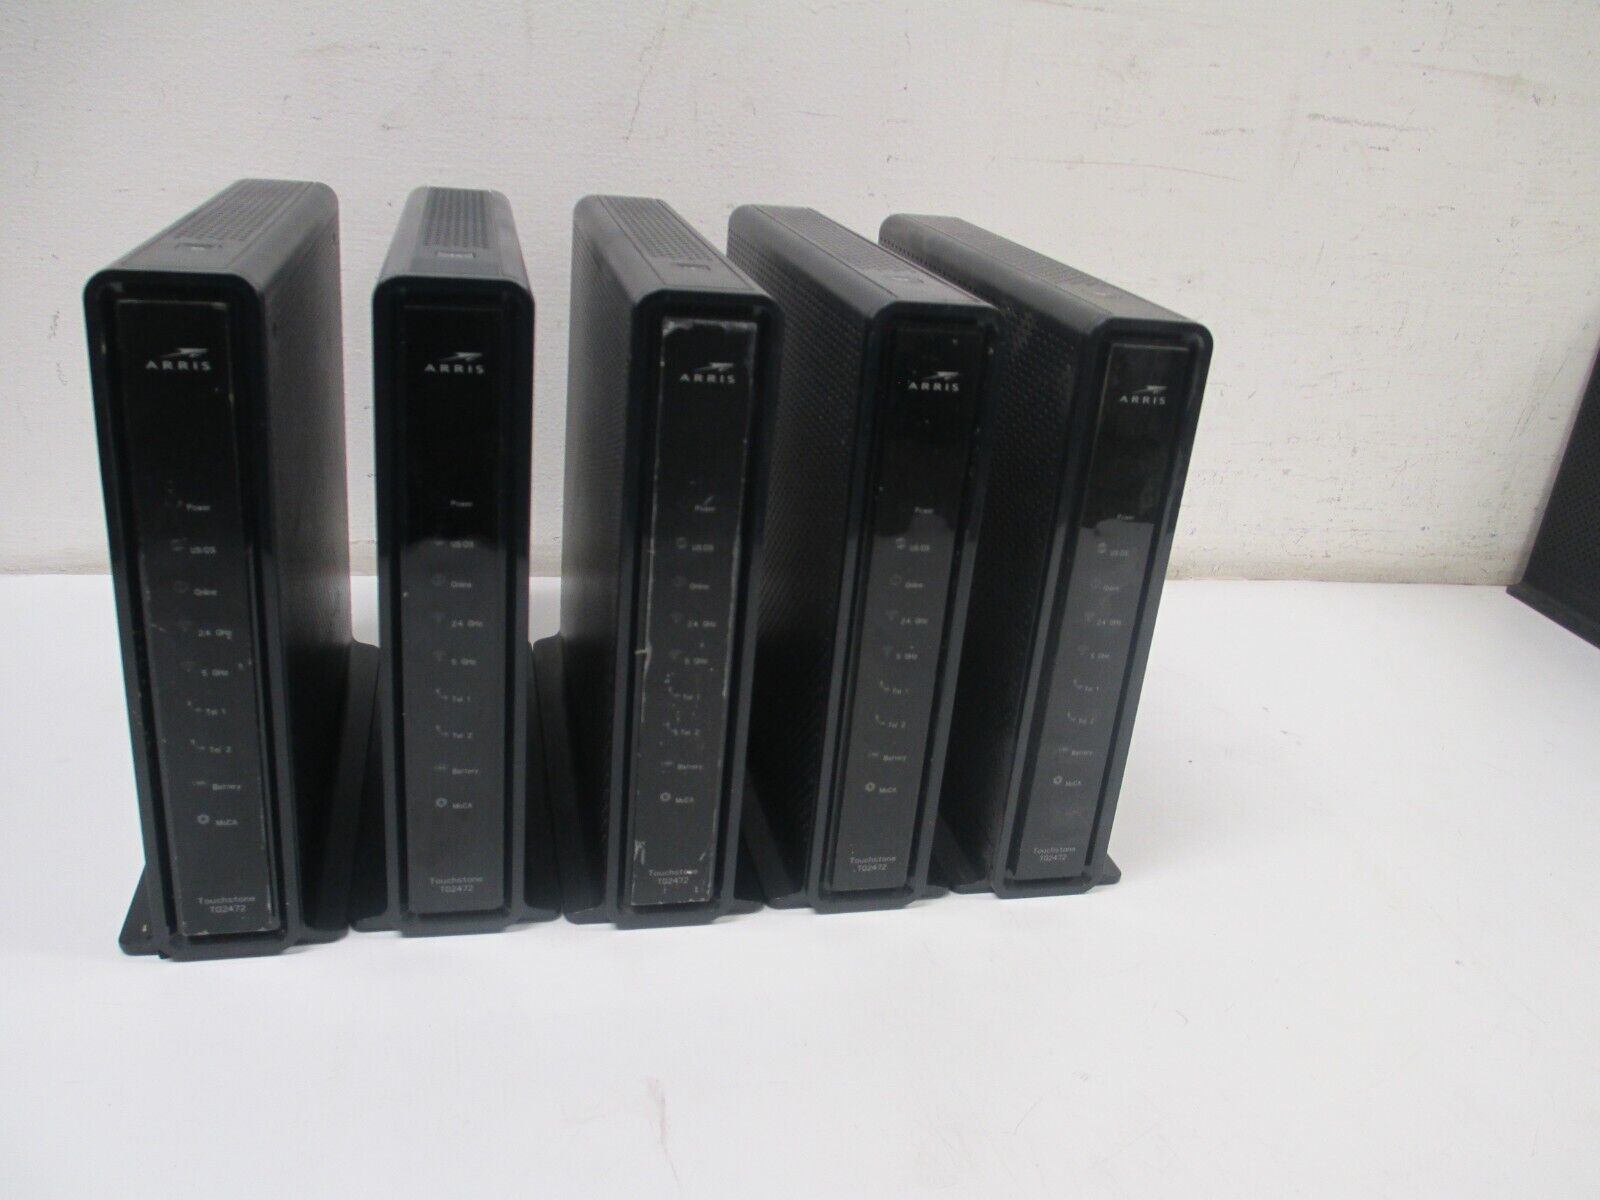 LOT OF 5 Arris Touchstone TG2472G DOCSIS 3.0 Cable Modems *Parts Only*